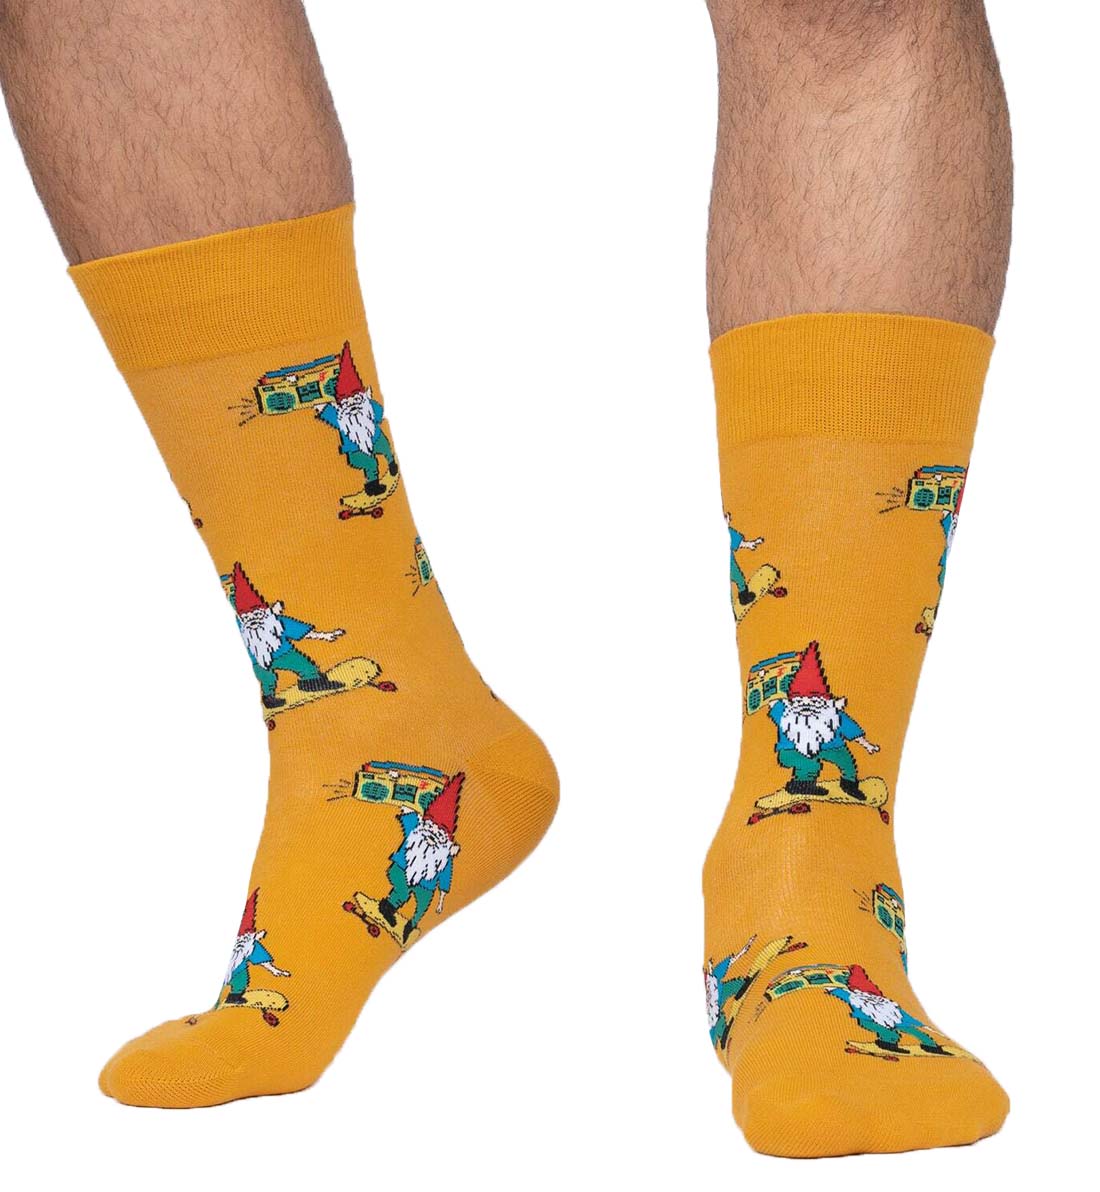 SOCK it to me Men&#39;s Crew Socks (mef0488),Gnarly Gnome - Gnarly Gnome,One Size